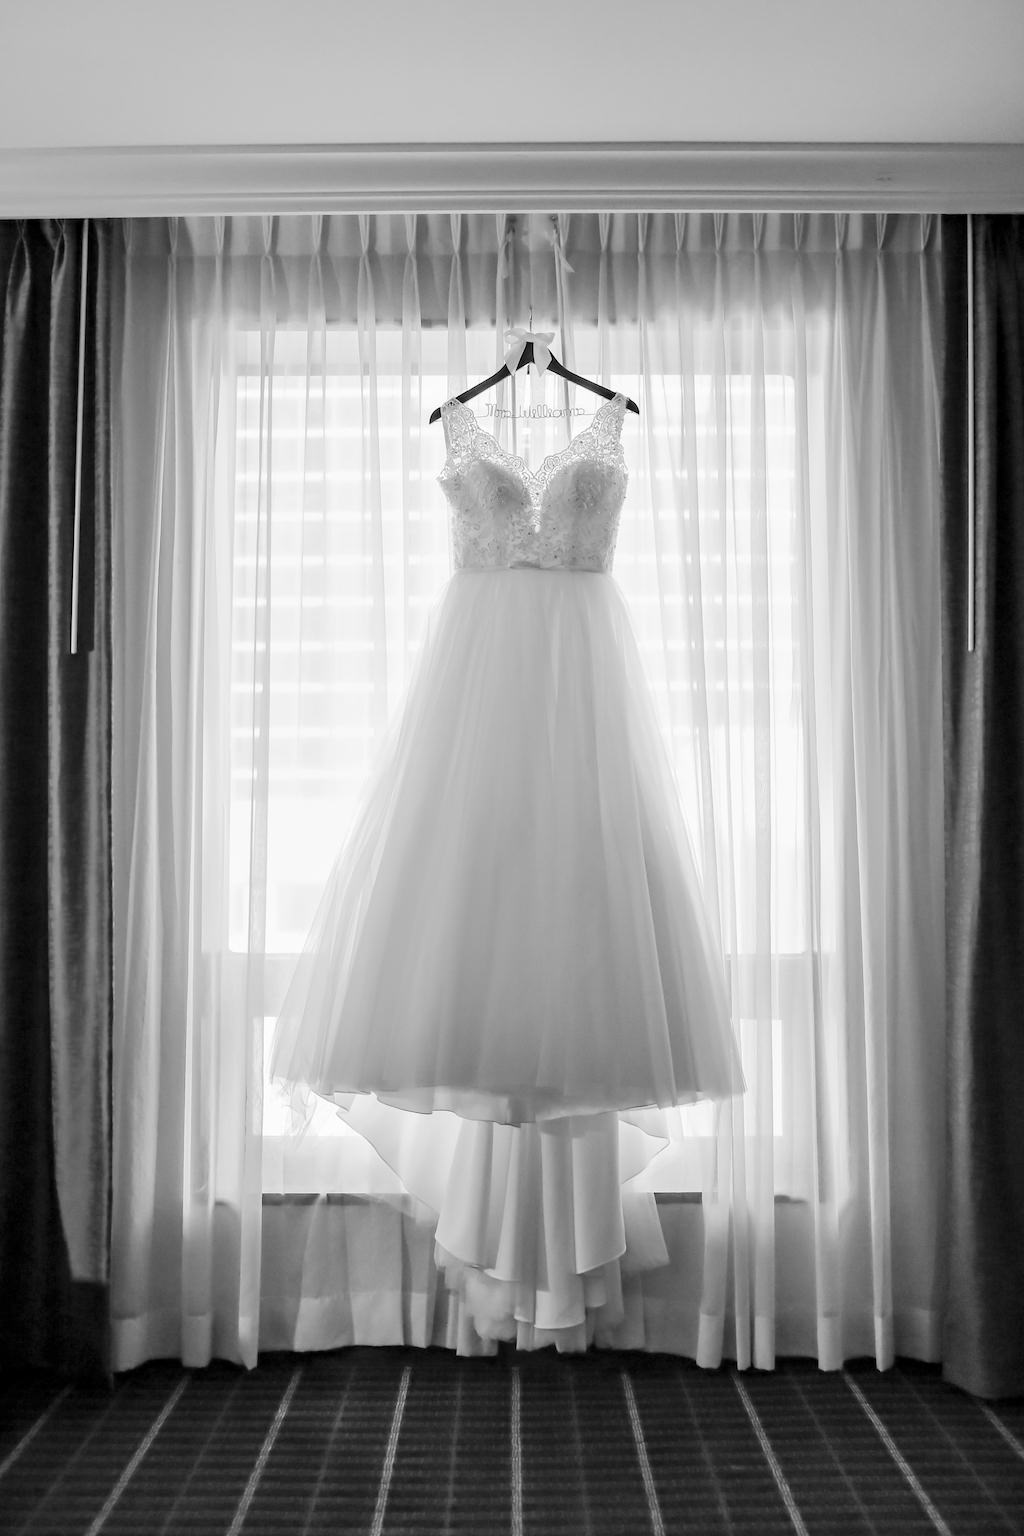 Lace and Illusion Bodice with Straps and Ballgown Skirt Wedding Dress | Tampa Bay Wedding Photographer Lifelong Photography Studio